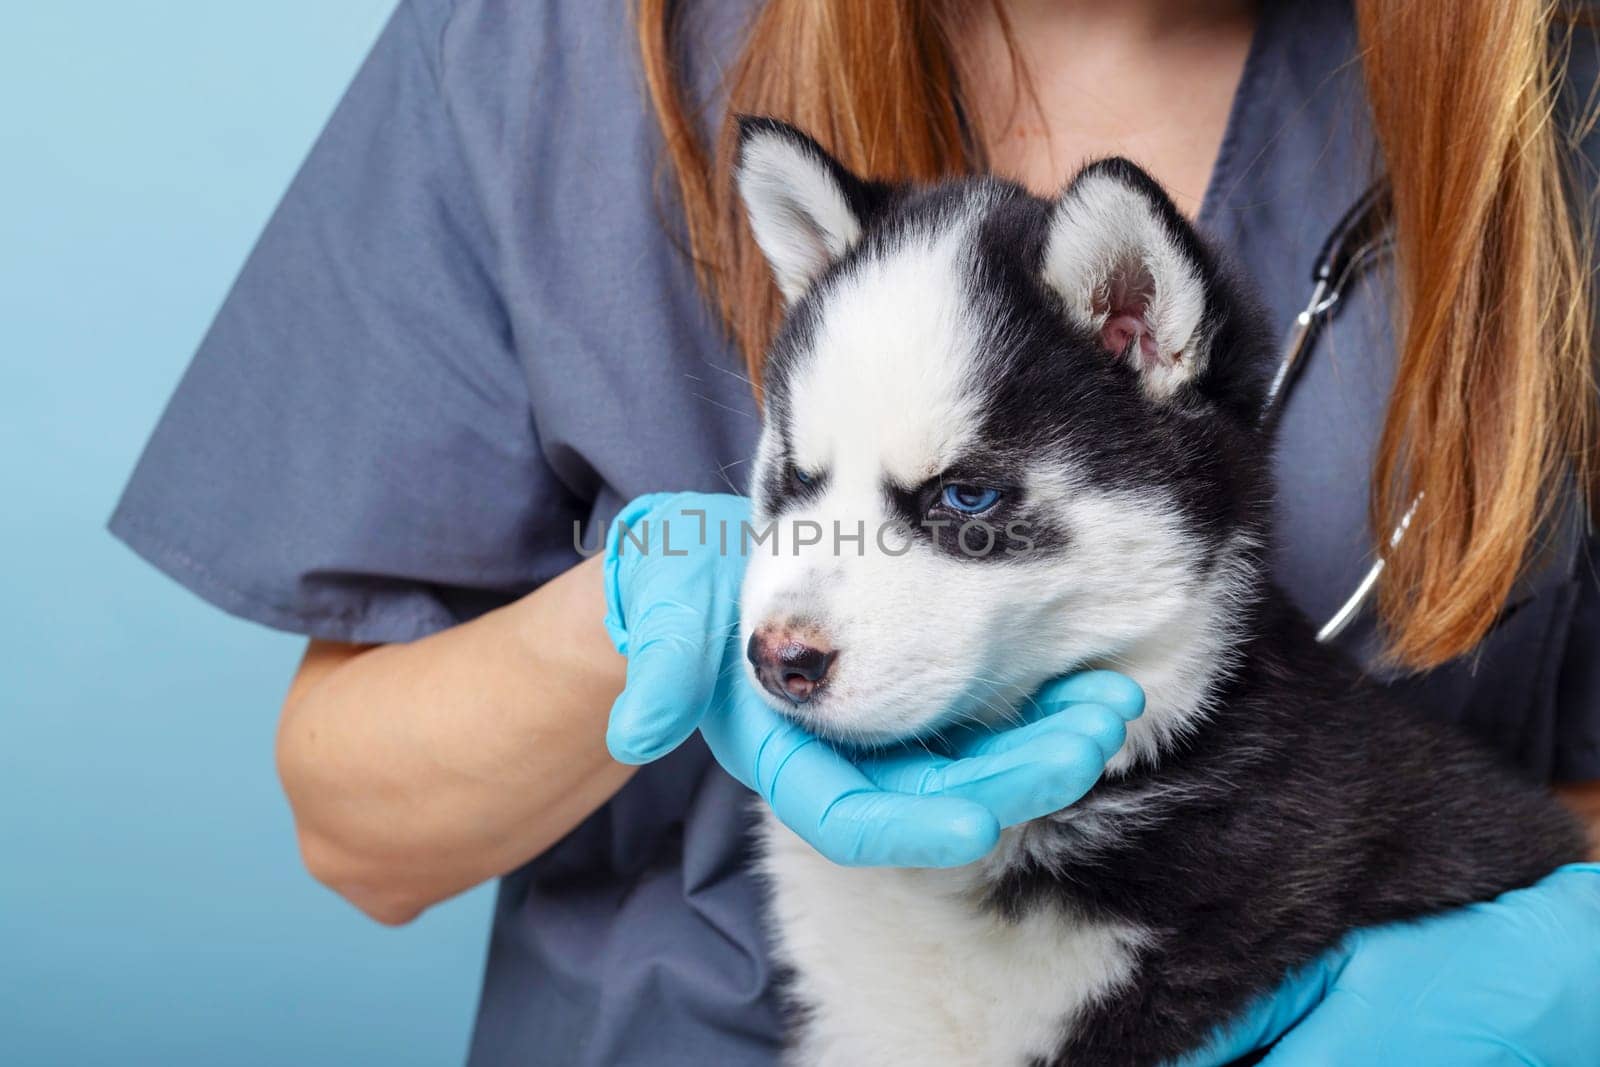 Siberian husky puppy being examined by a vet in a clinic. Veterinary care concept. Design for informational materials, educational content, and healthcare posters.